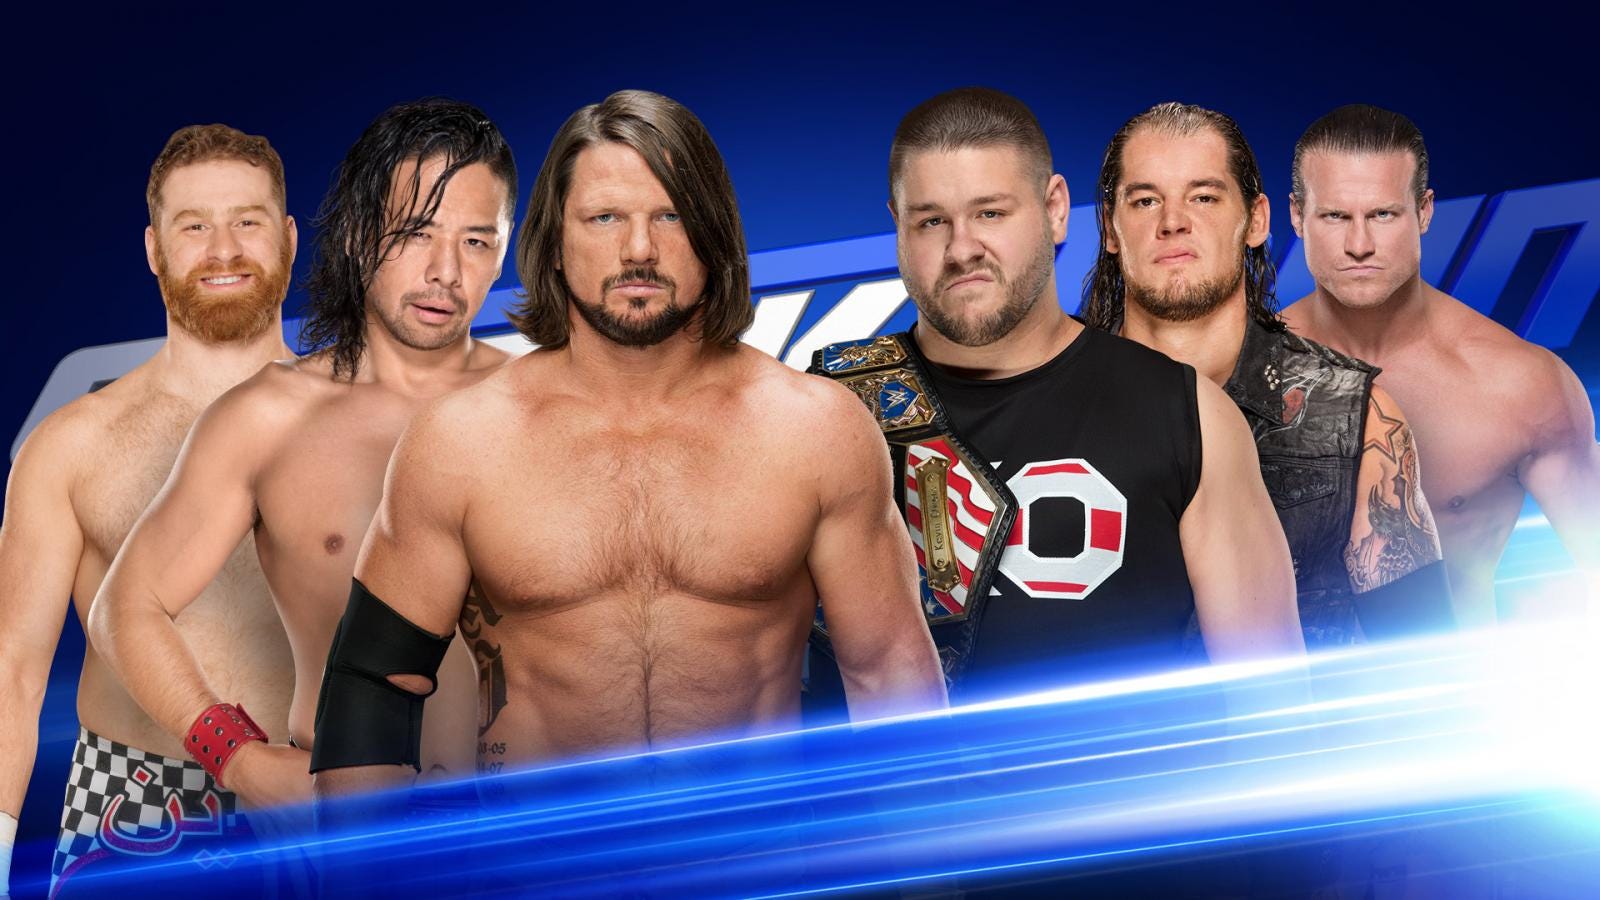 Mitchell S Wwe Smackdown Live Report 6 13 17 By Steven Mitchell Medium